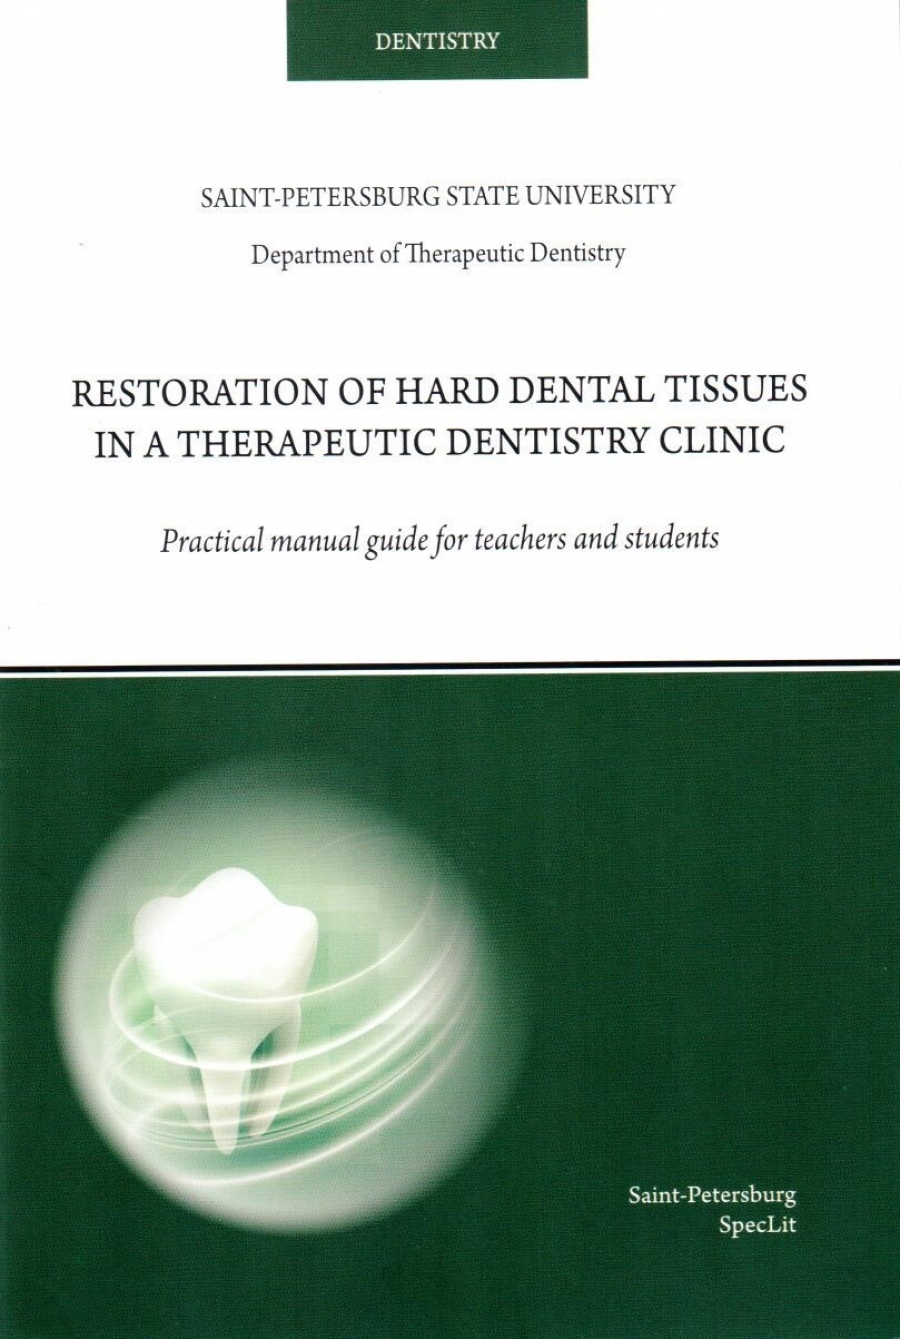  ..,  .. RESTORATION OF HARD DENTAL TISSUES IN A THERAPEUTIC DENTIS 